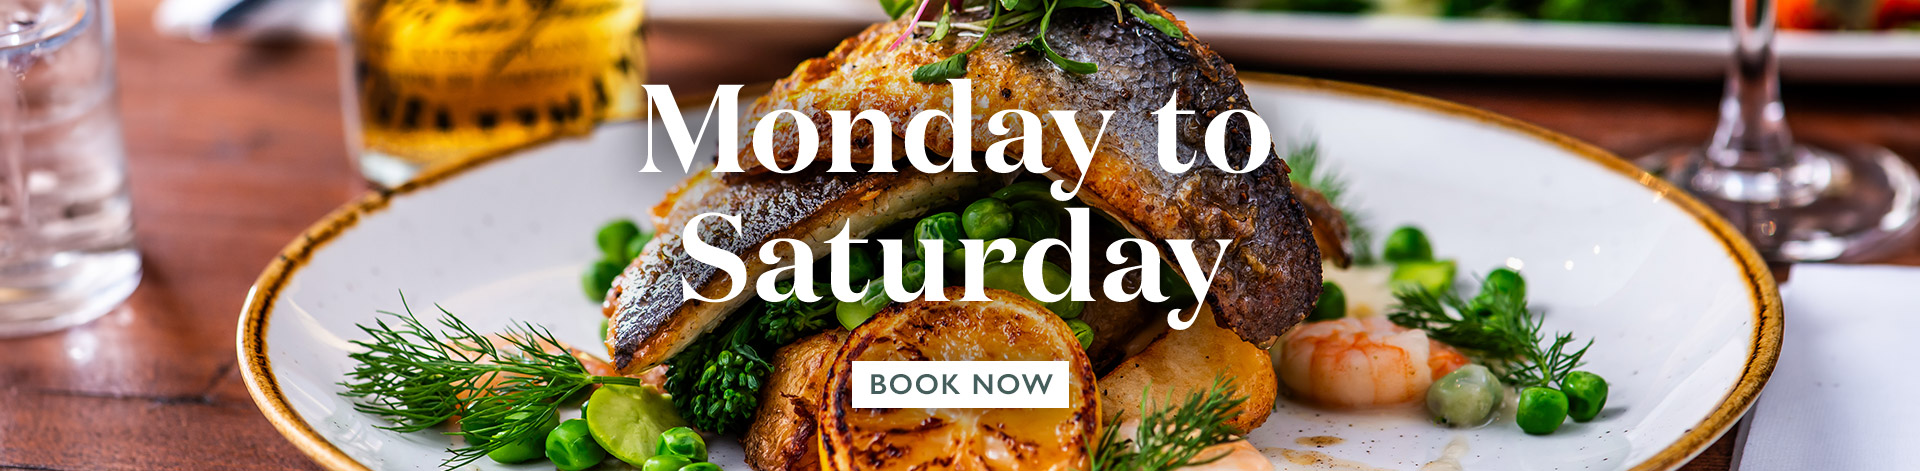 Book now at The Aperfield Inn